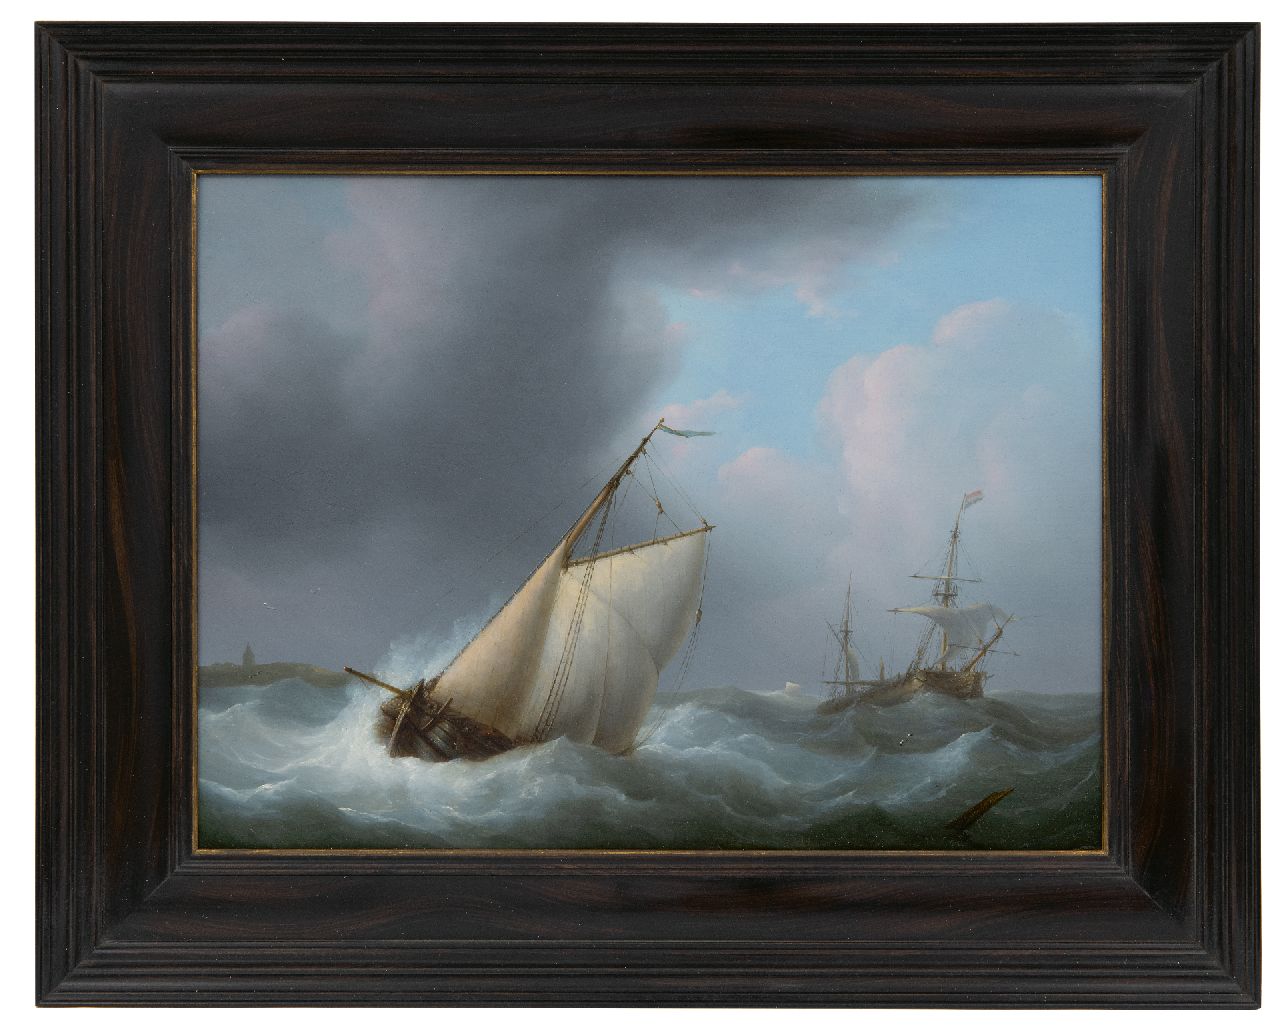 Schouman M.  | Martinus Schouman, Damage off the coast in a storm, oil on panel 29.3 x 38.7 cm, signed l.r. on floating wood